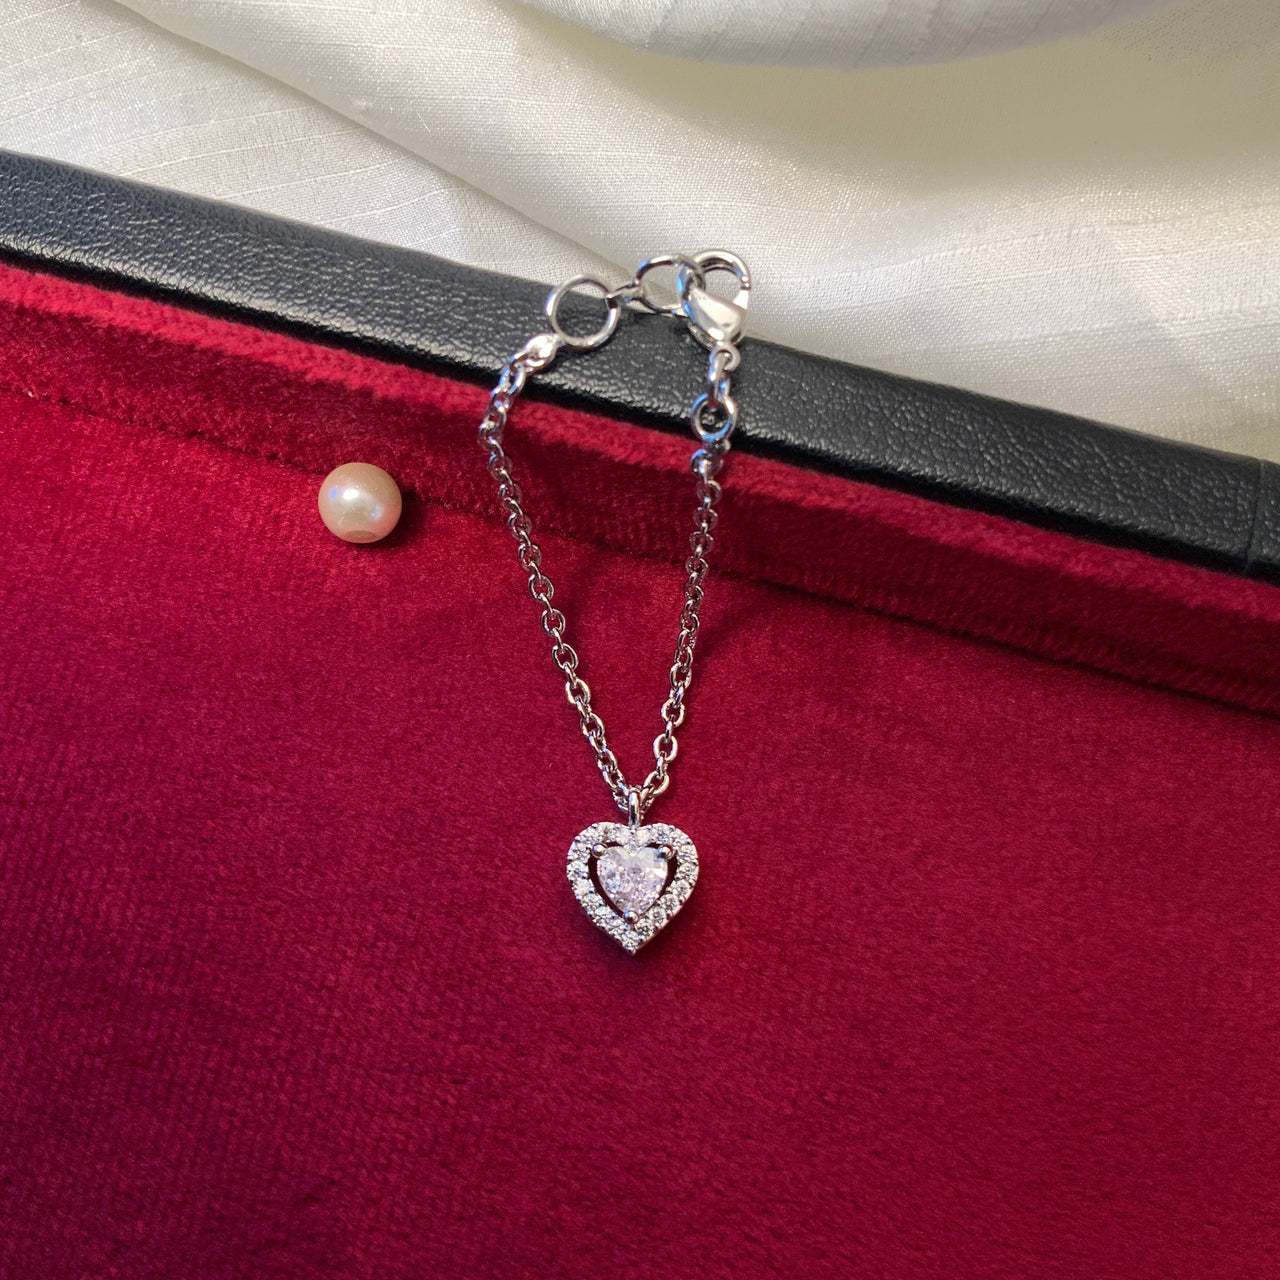 Endearing Heart CZ Silver Plated Watch Charm